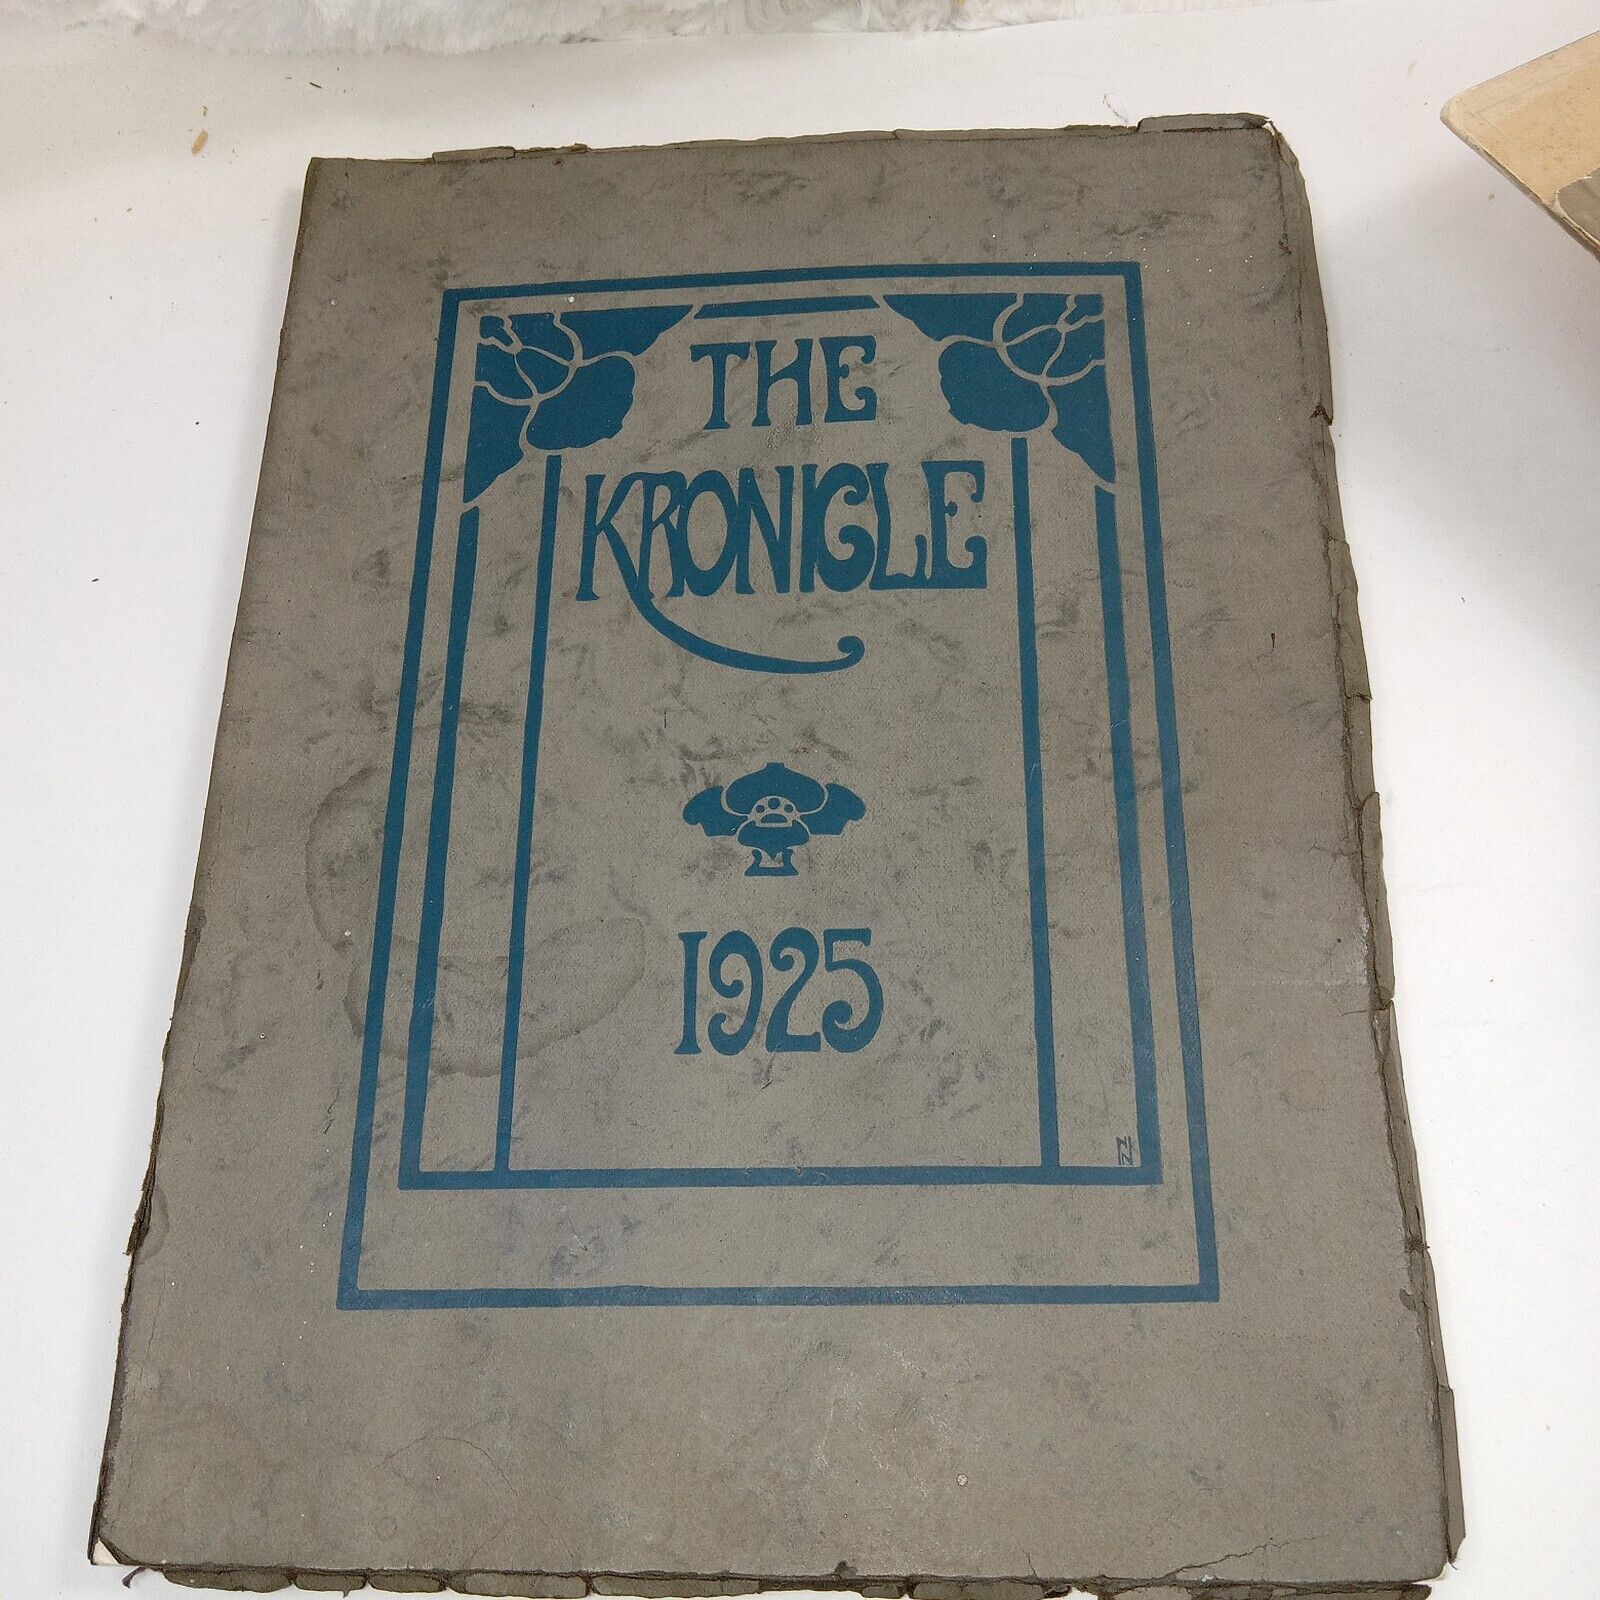 Vintage 1925 Yearbook The Kronicle Soft Cover Keene NH 8x10 Inch